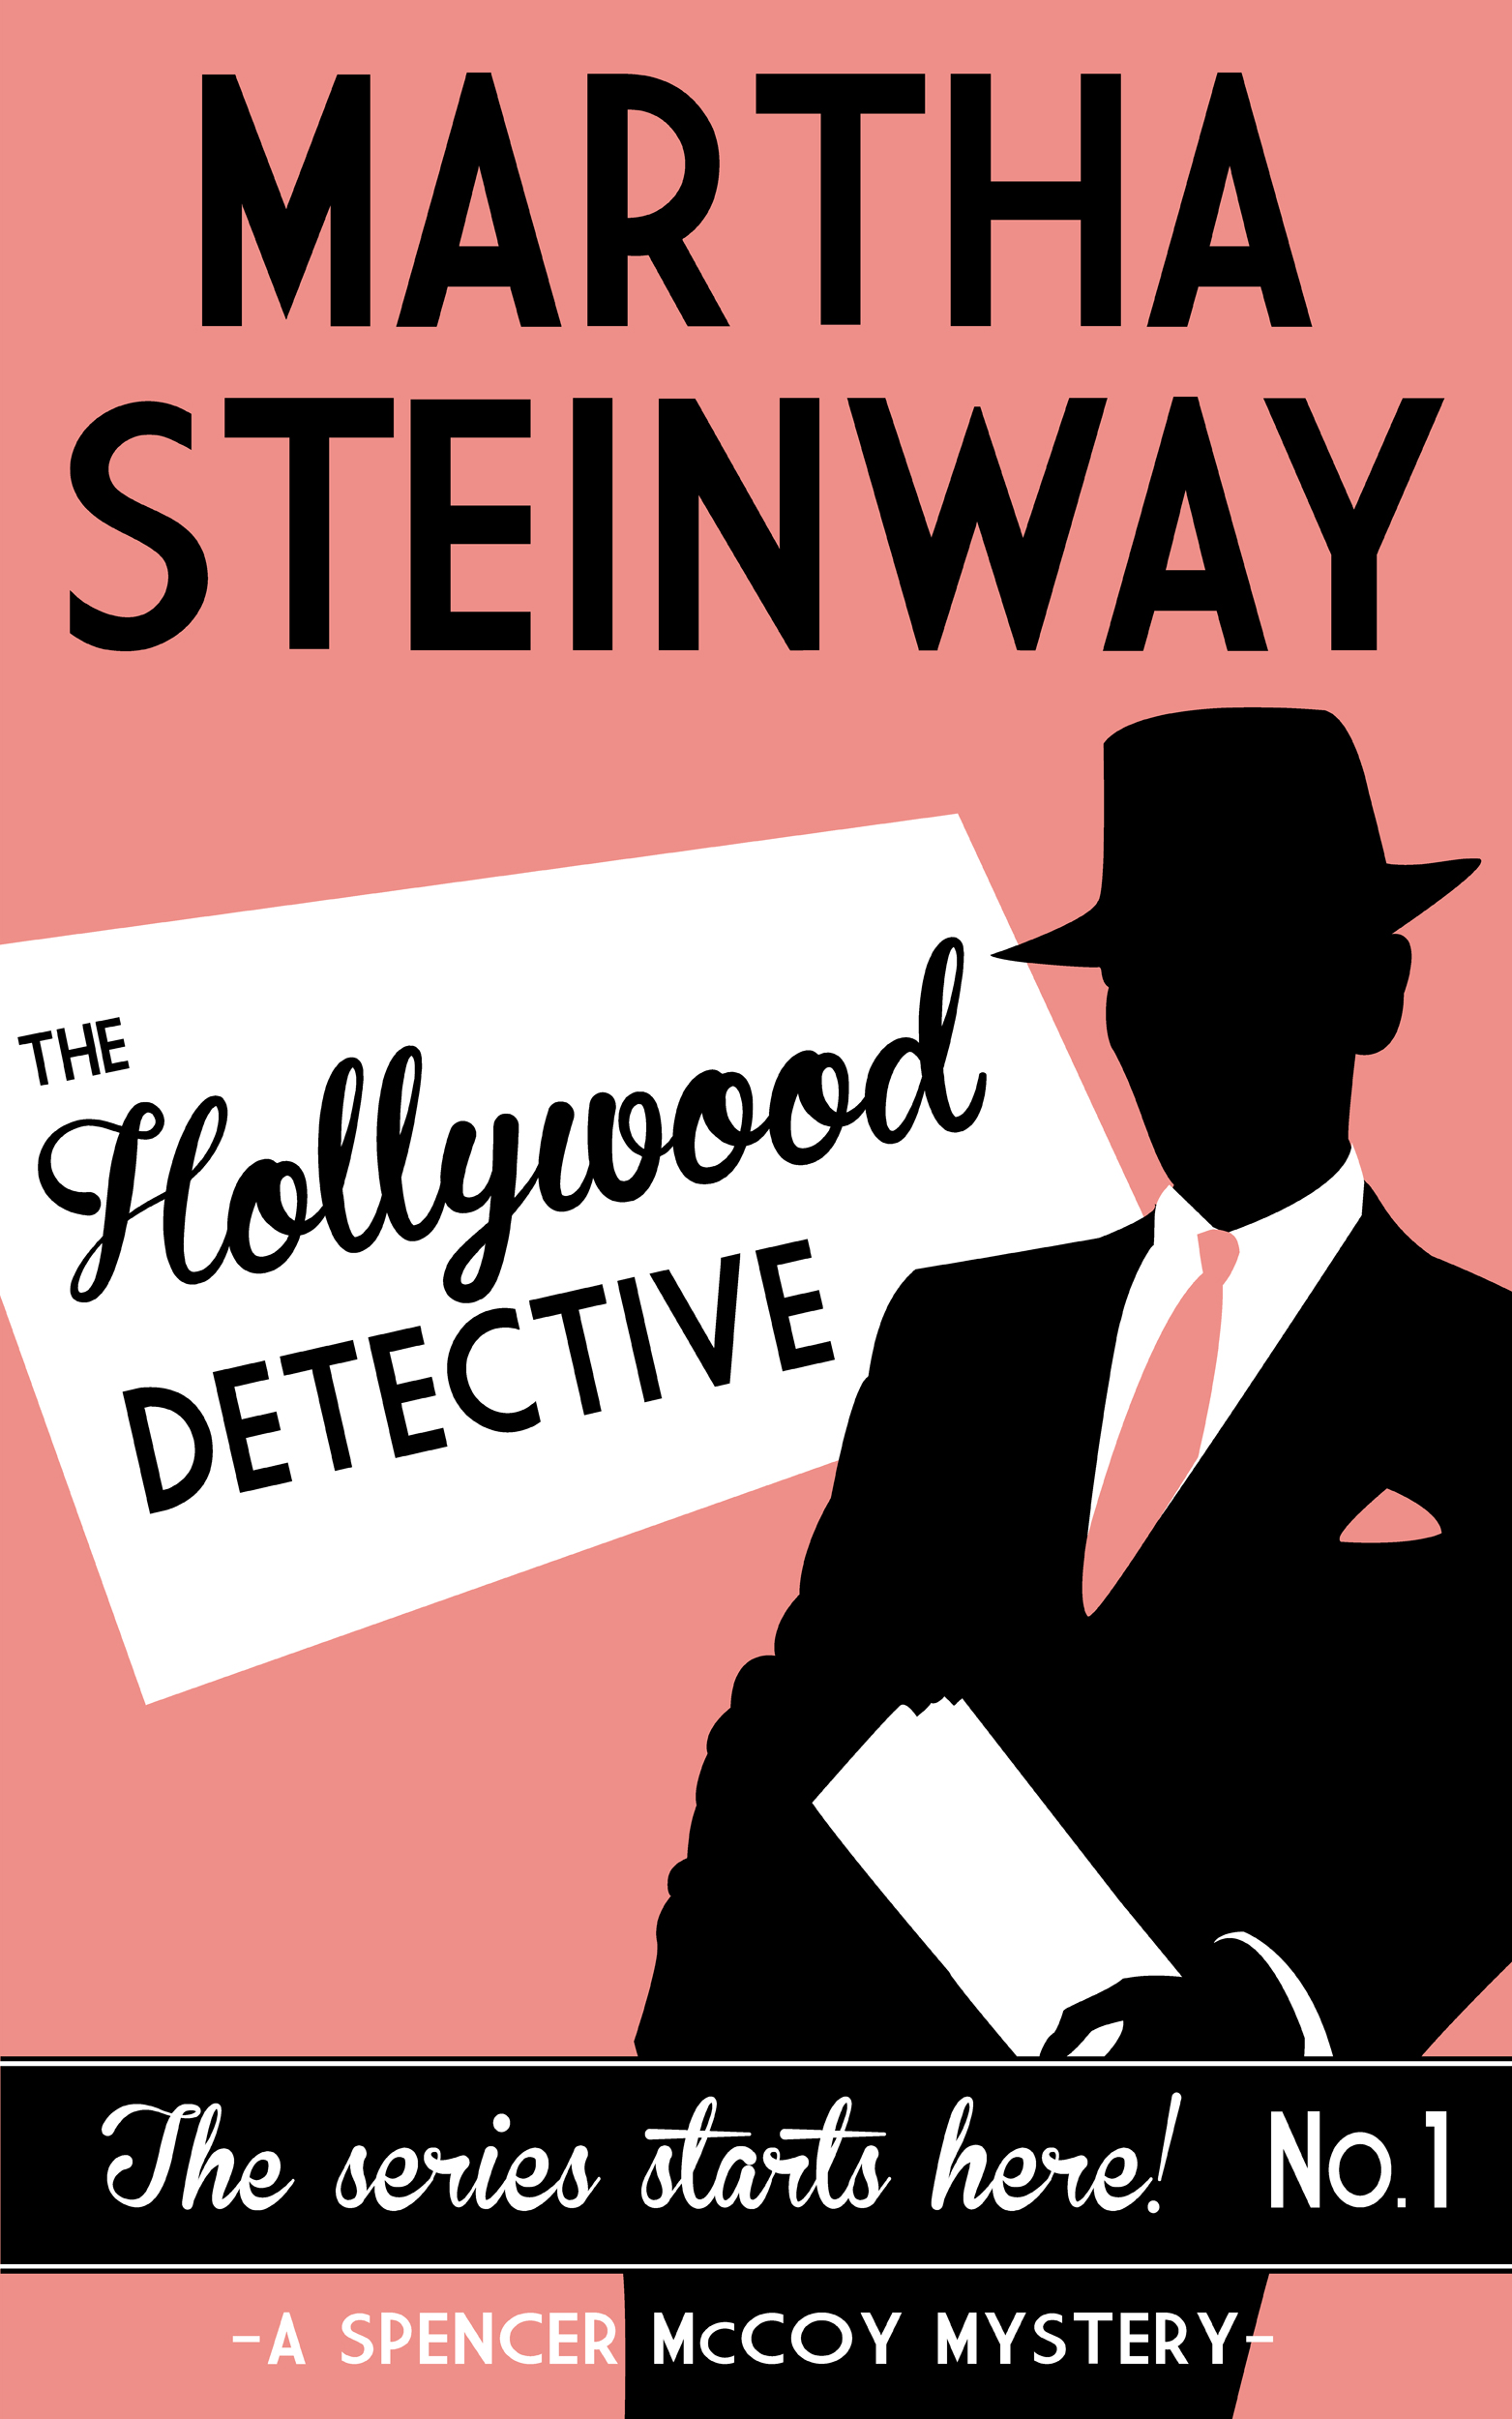 FREE: The Hollywood Detective by Martha Steinway